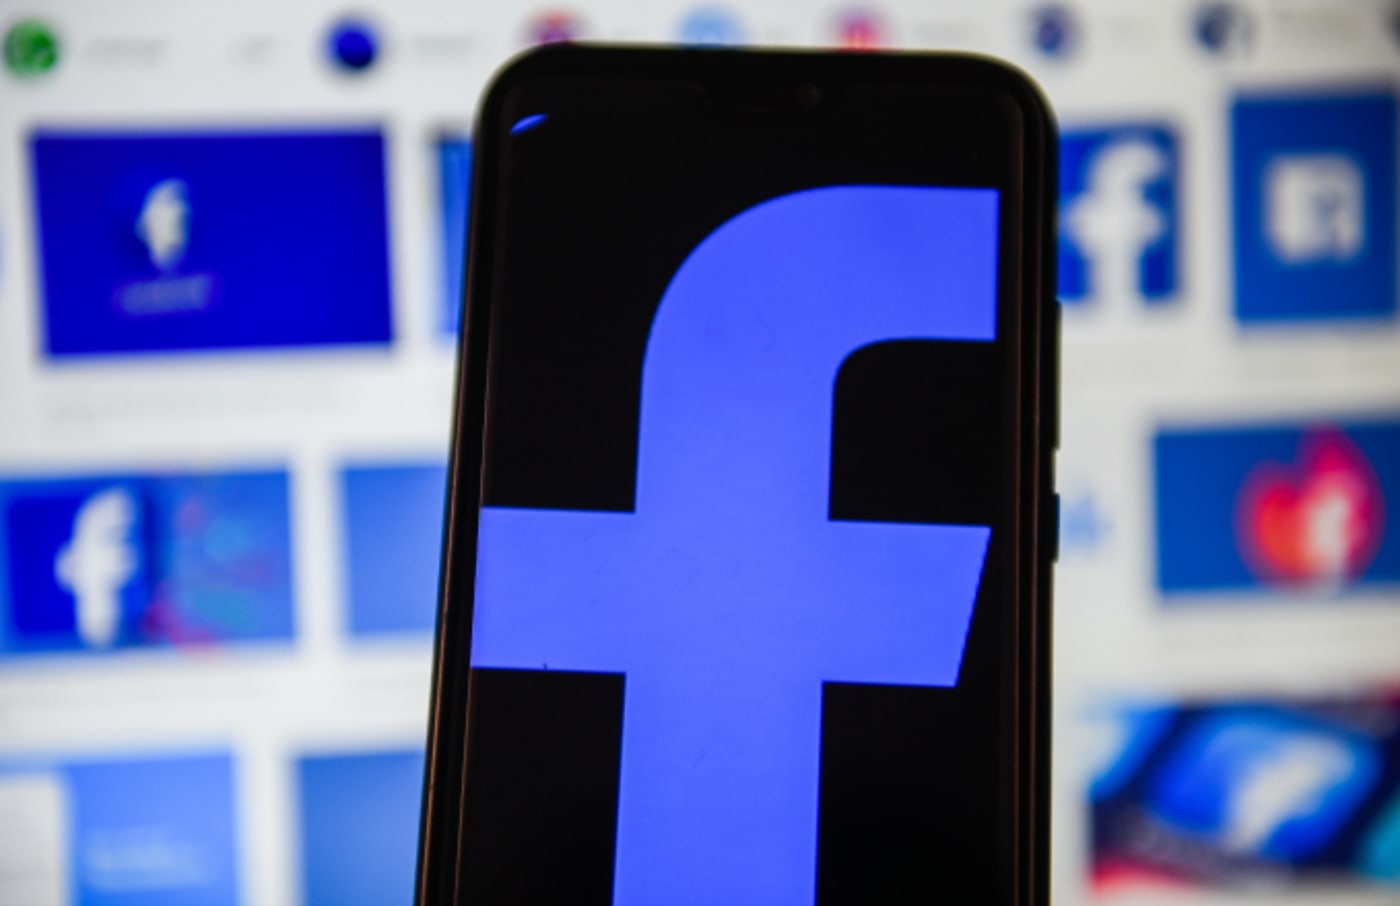 In this photo illustration a Facebook logo displayed on a smartphone